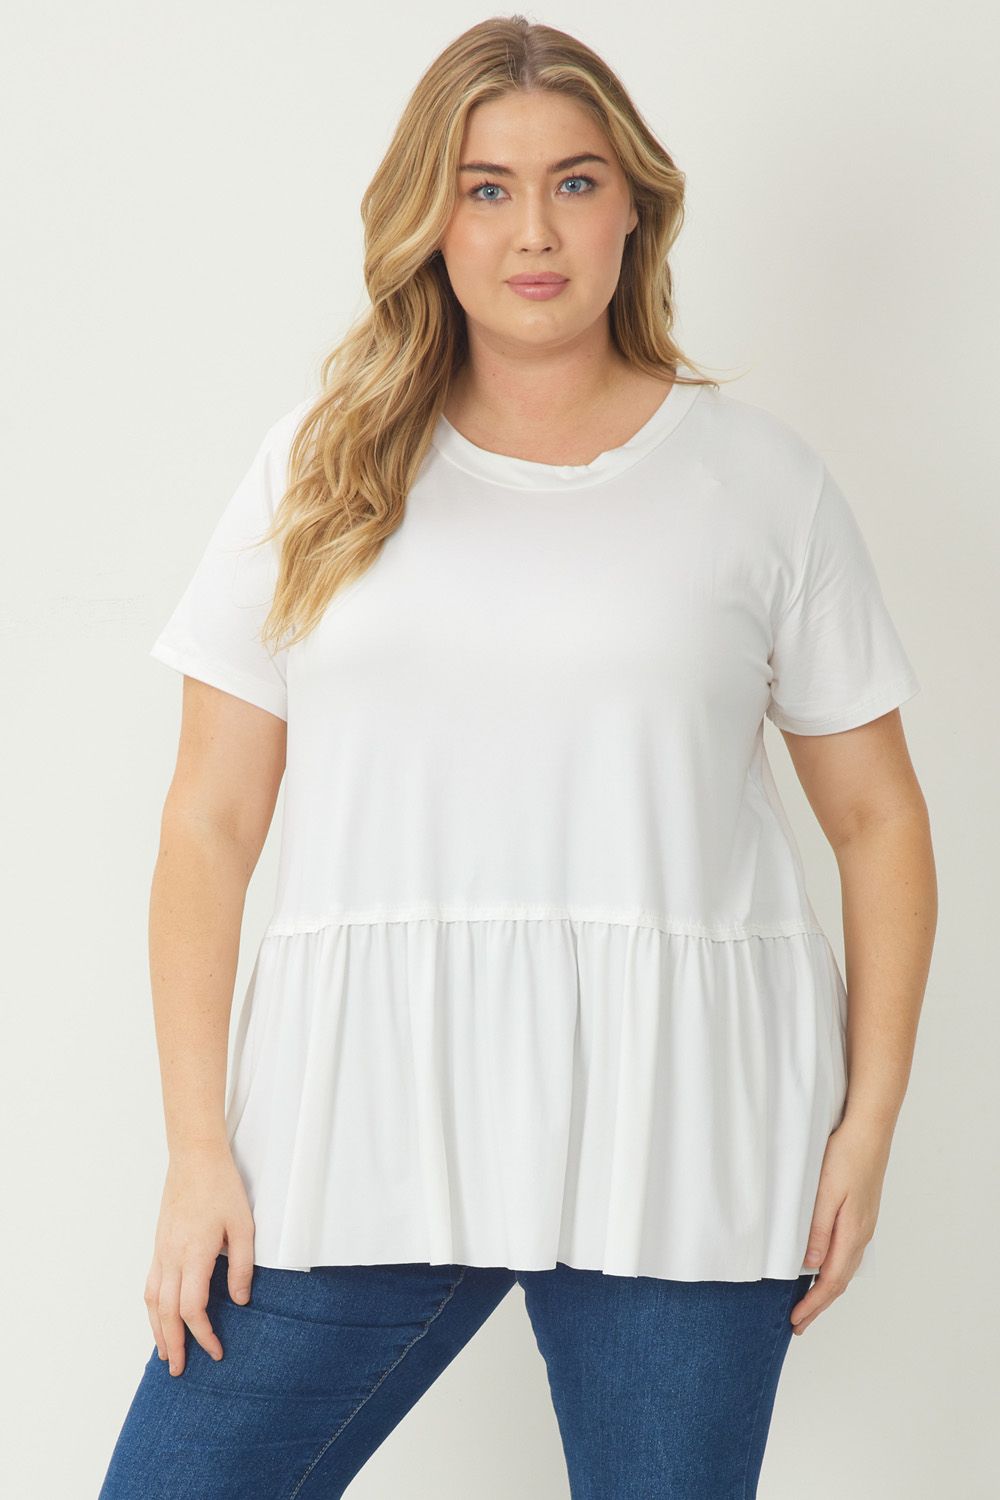 Off White Short Sleeve Top in Curvy